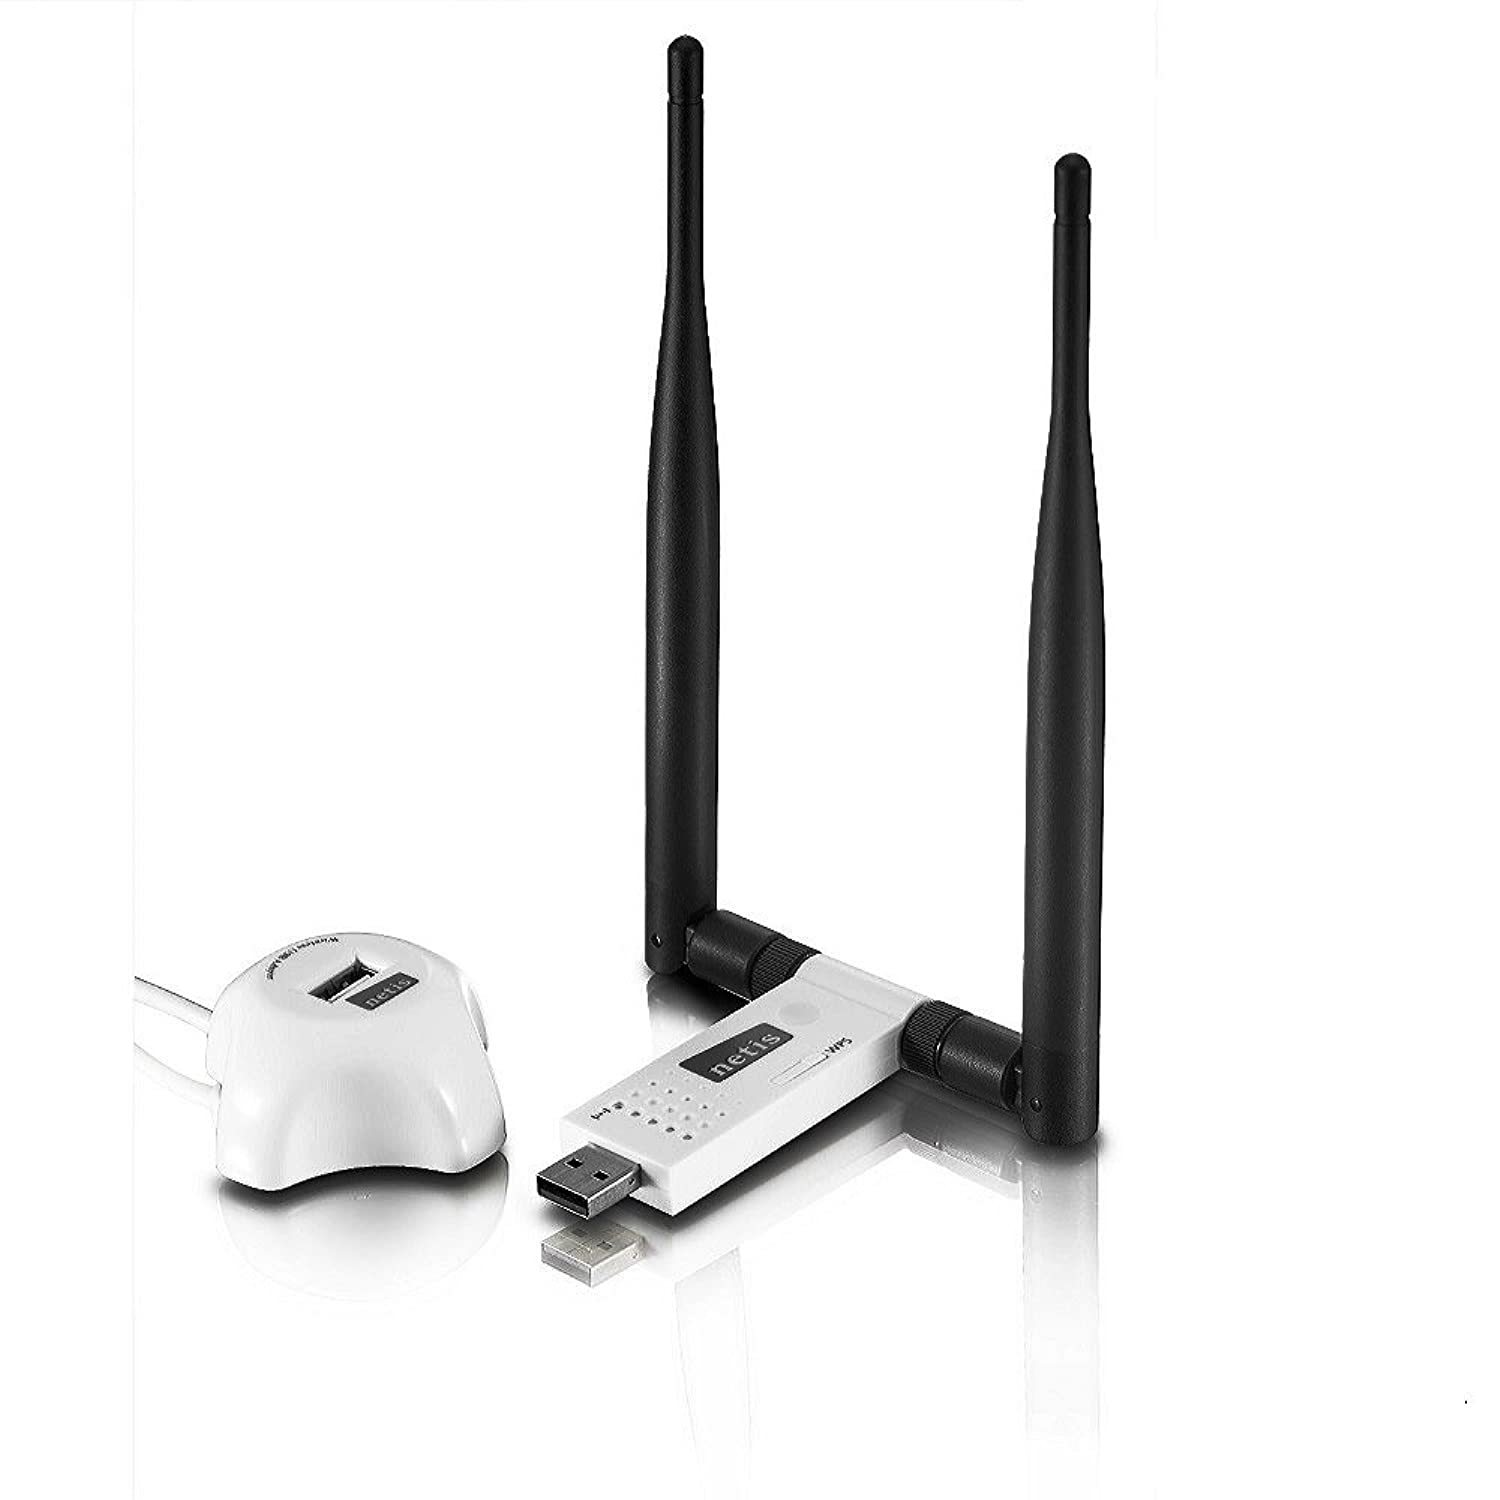 Primary image for Wireless N 300Mbps Long-Range Usb Adapter With Two 5Dbi Antennas And Usb 2.0 Cra